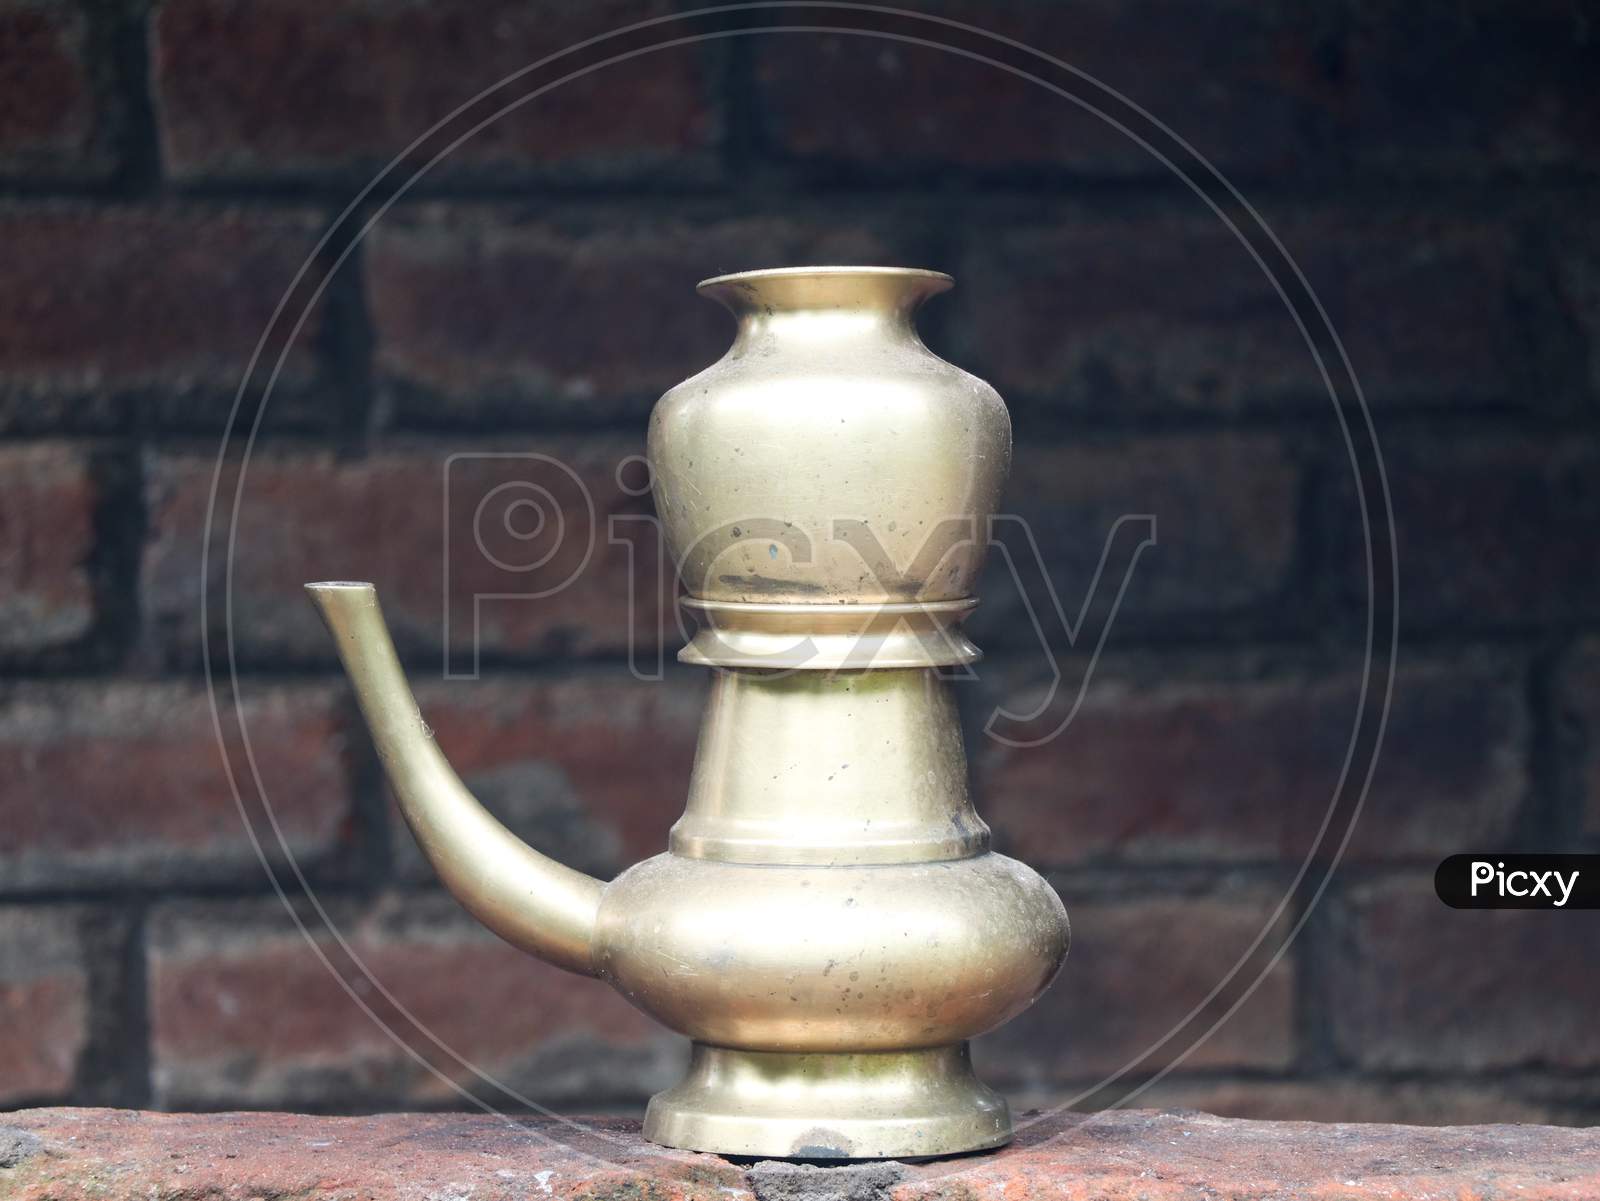 Kindi And Montha  Traditional Bronze Vessels  Used In Kerala For Holding Water